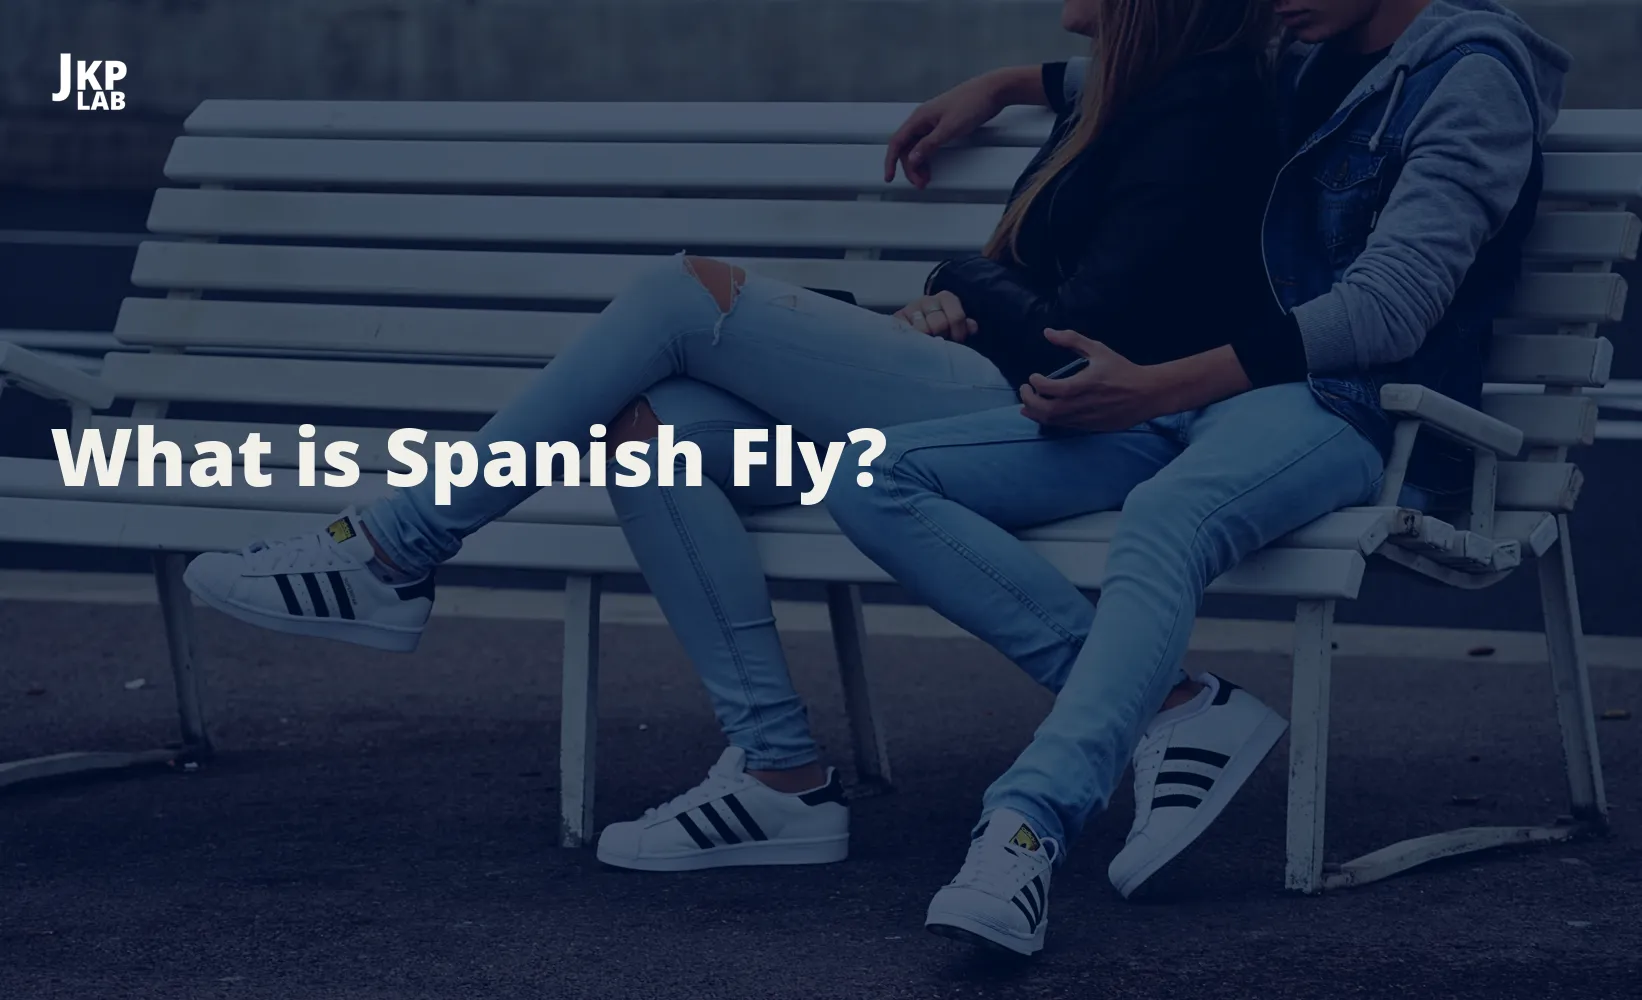 Spanish Fly and Beetles: The Connection